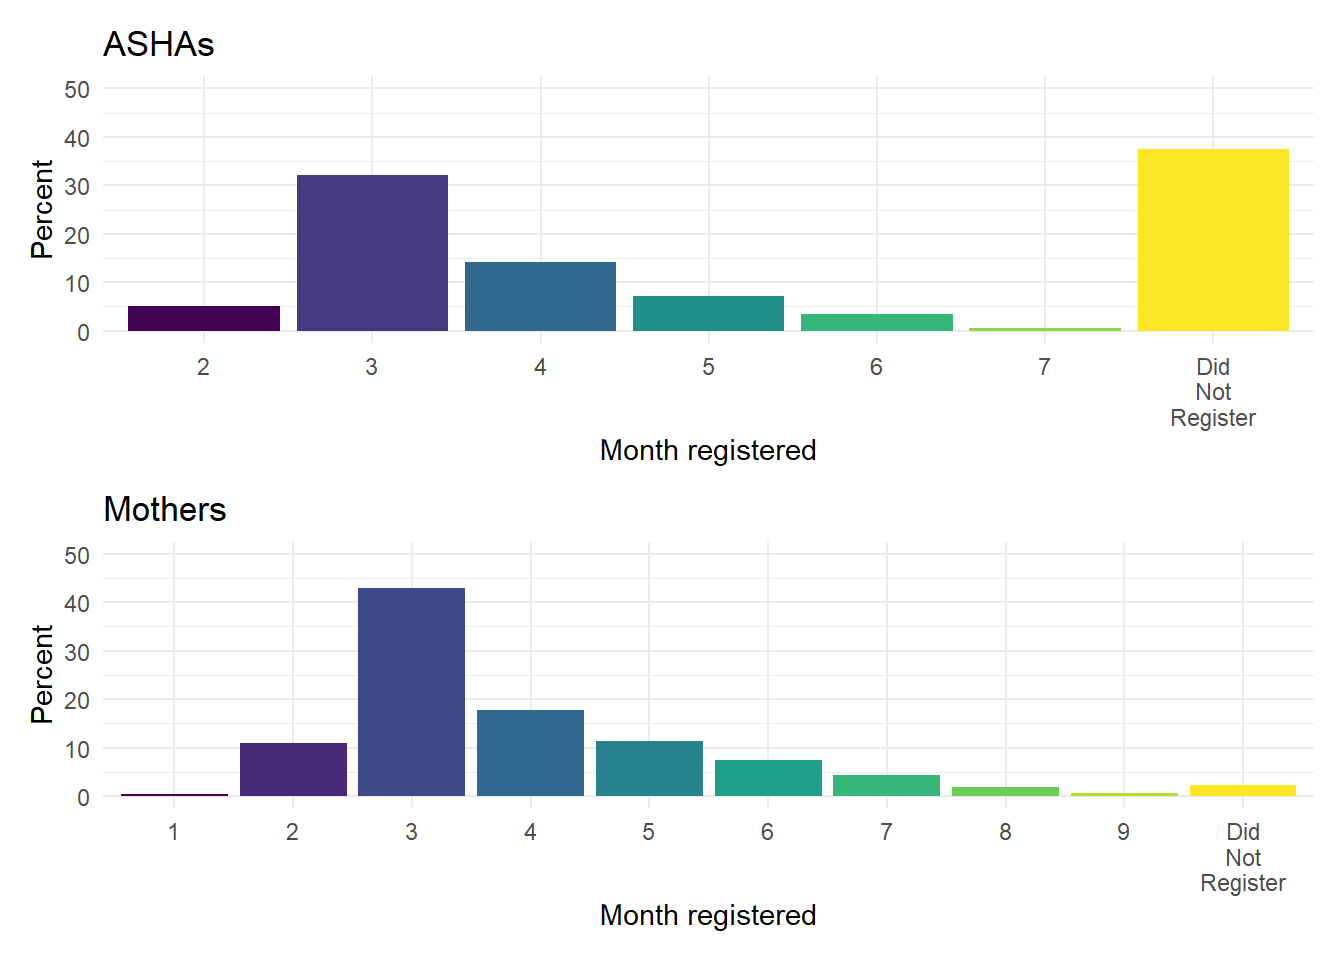 Self-reported antenatal-care registration by month of pregnancy